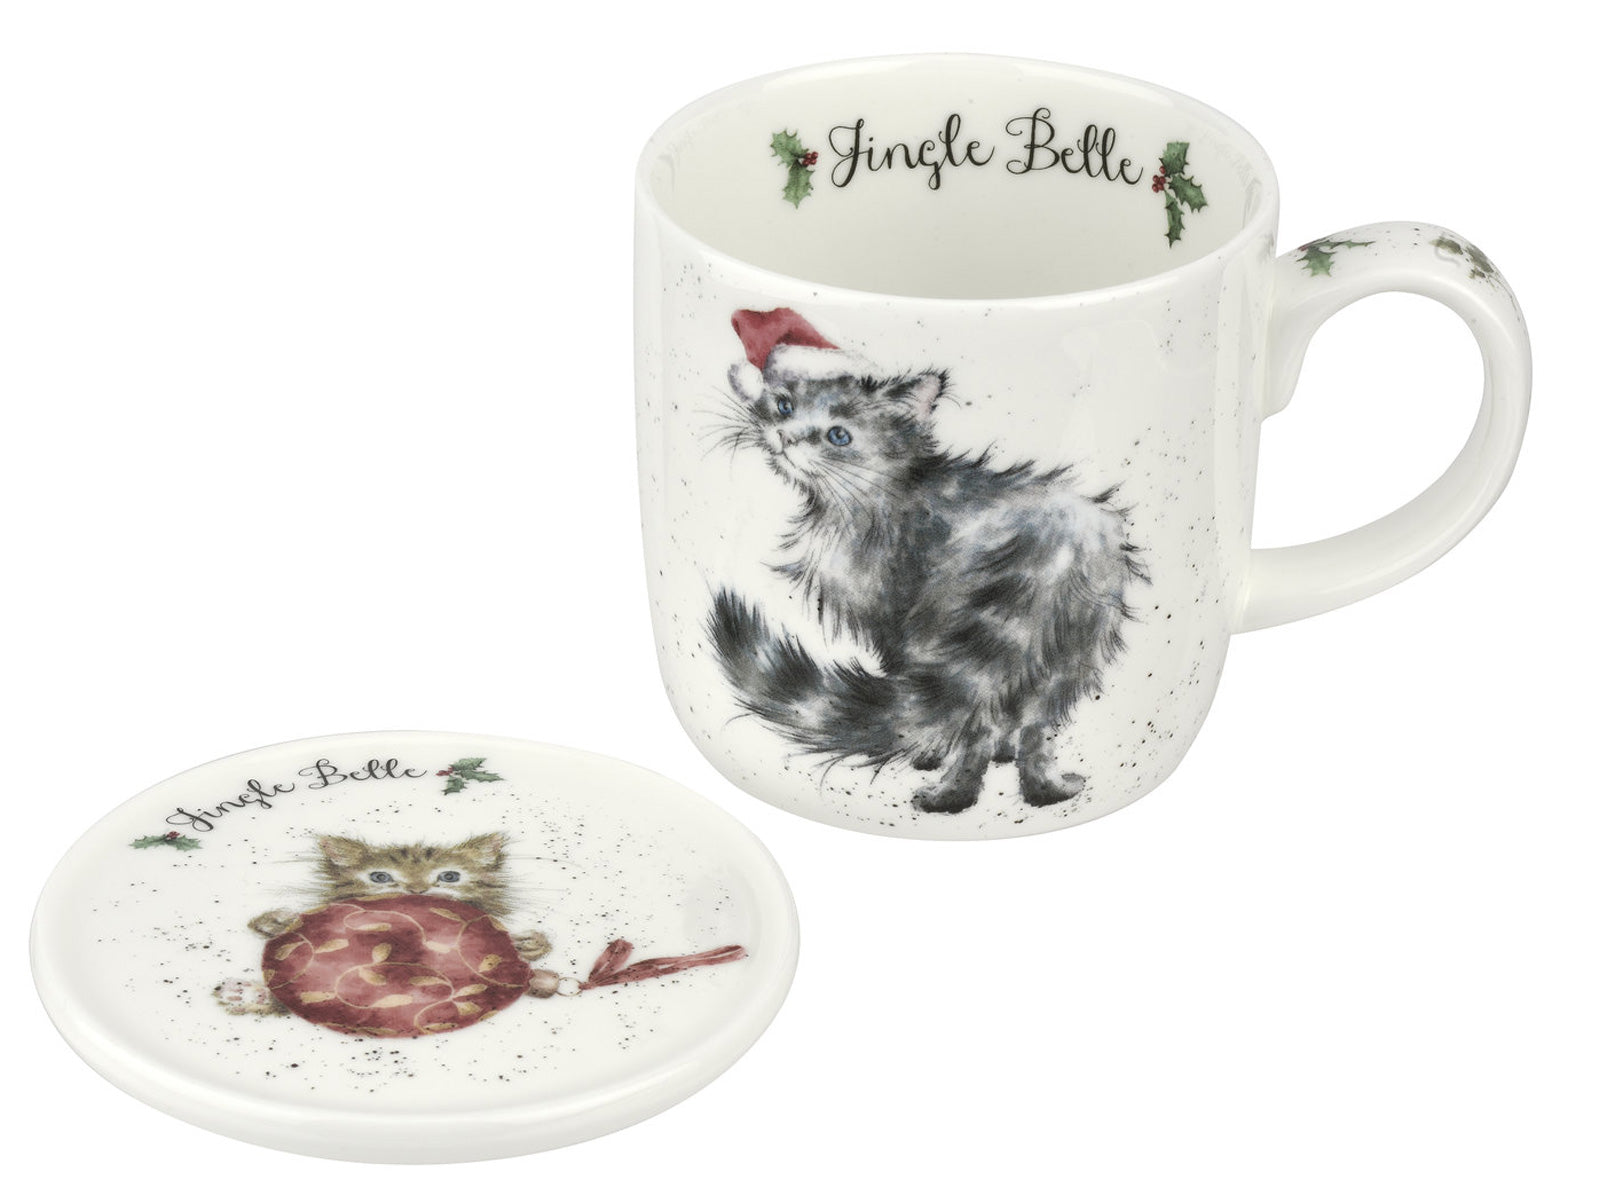 A white mug and coaster with festive cat designs on them